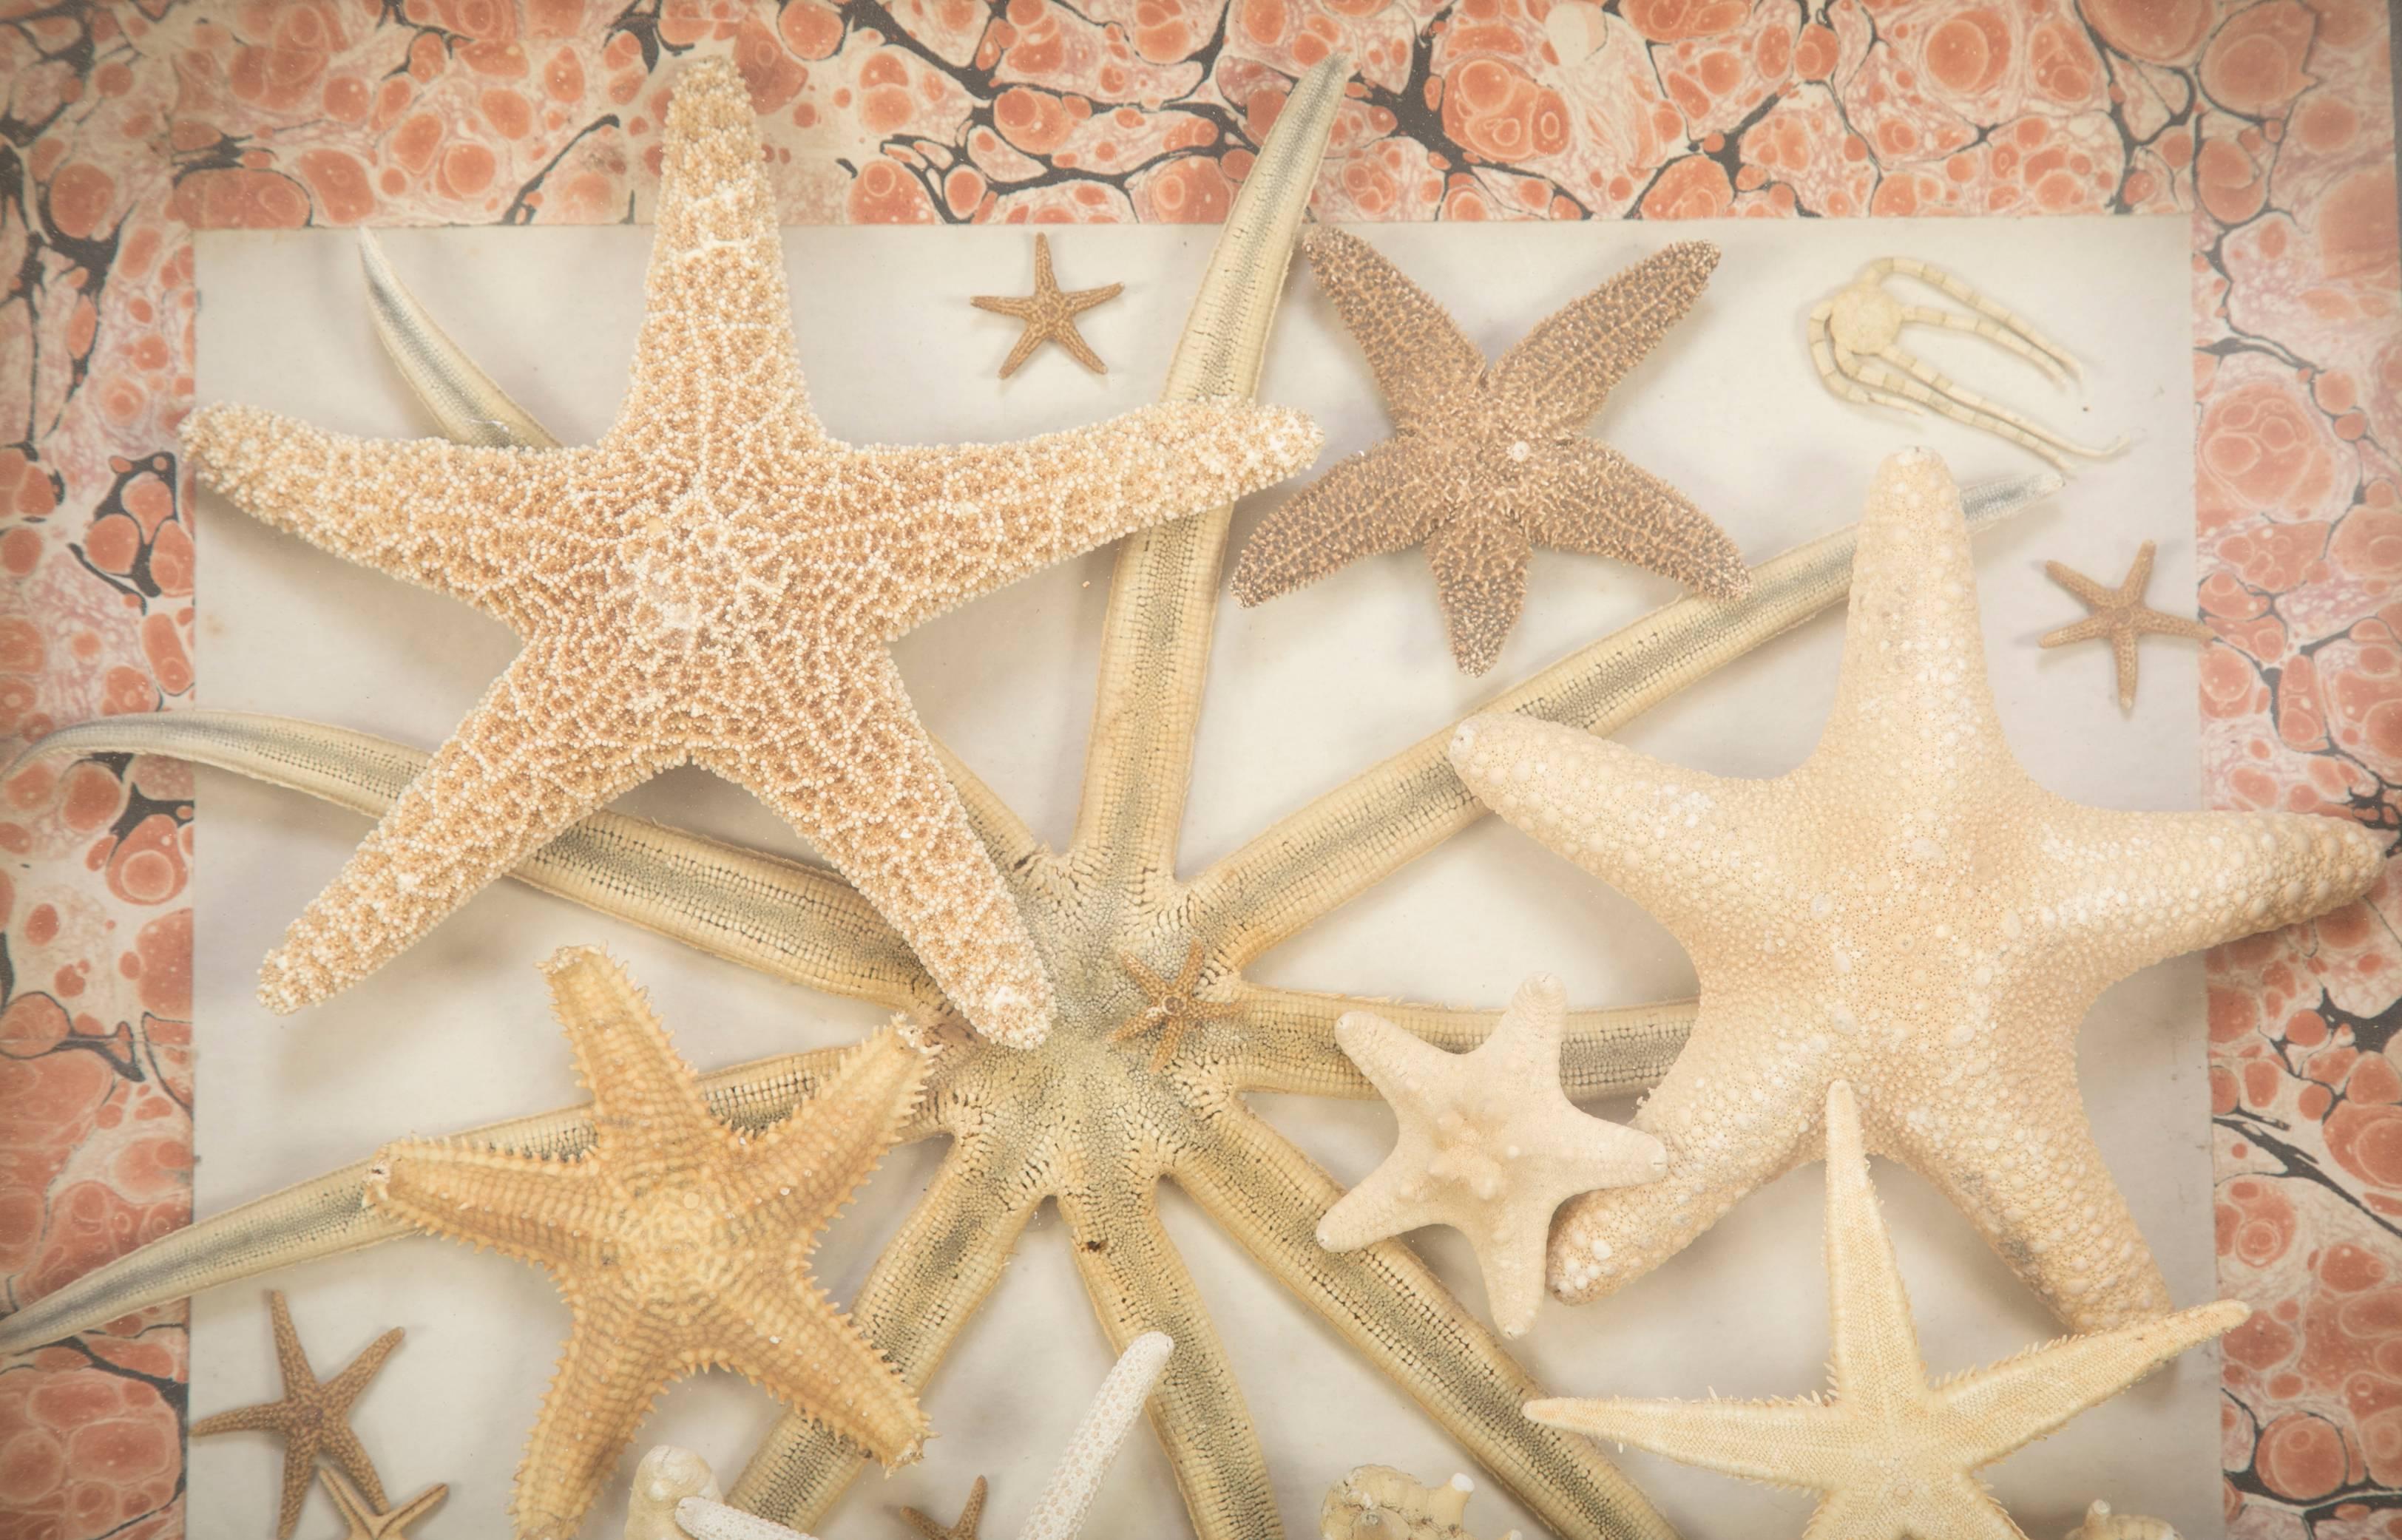 American Starfish Collection in a Mahogany and Giltwood Frame